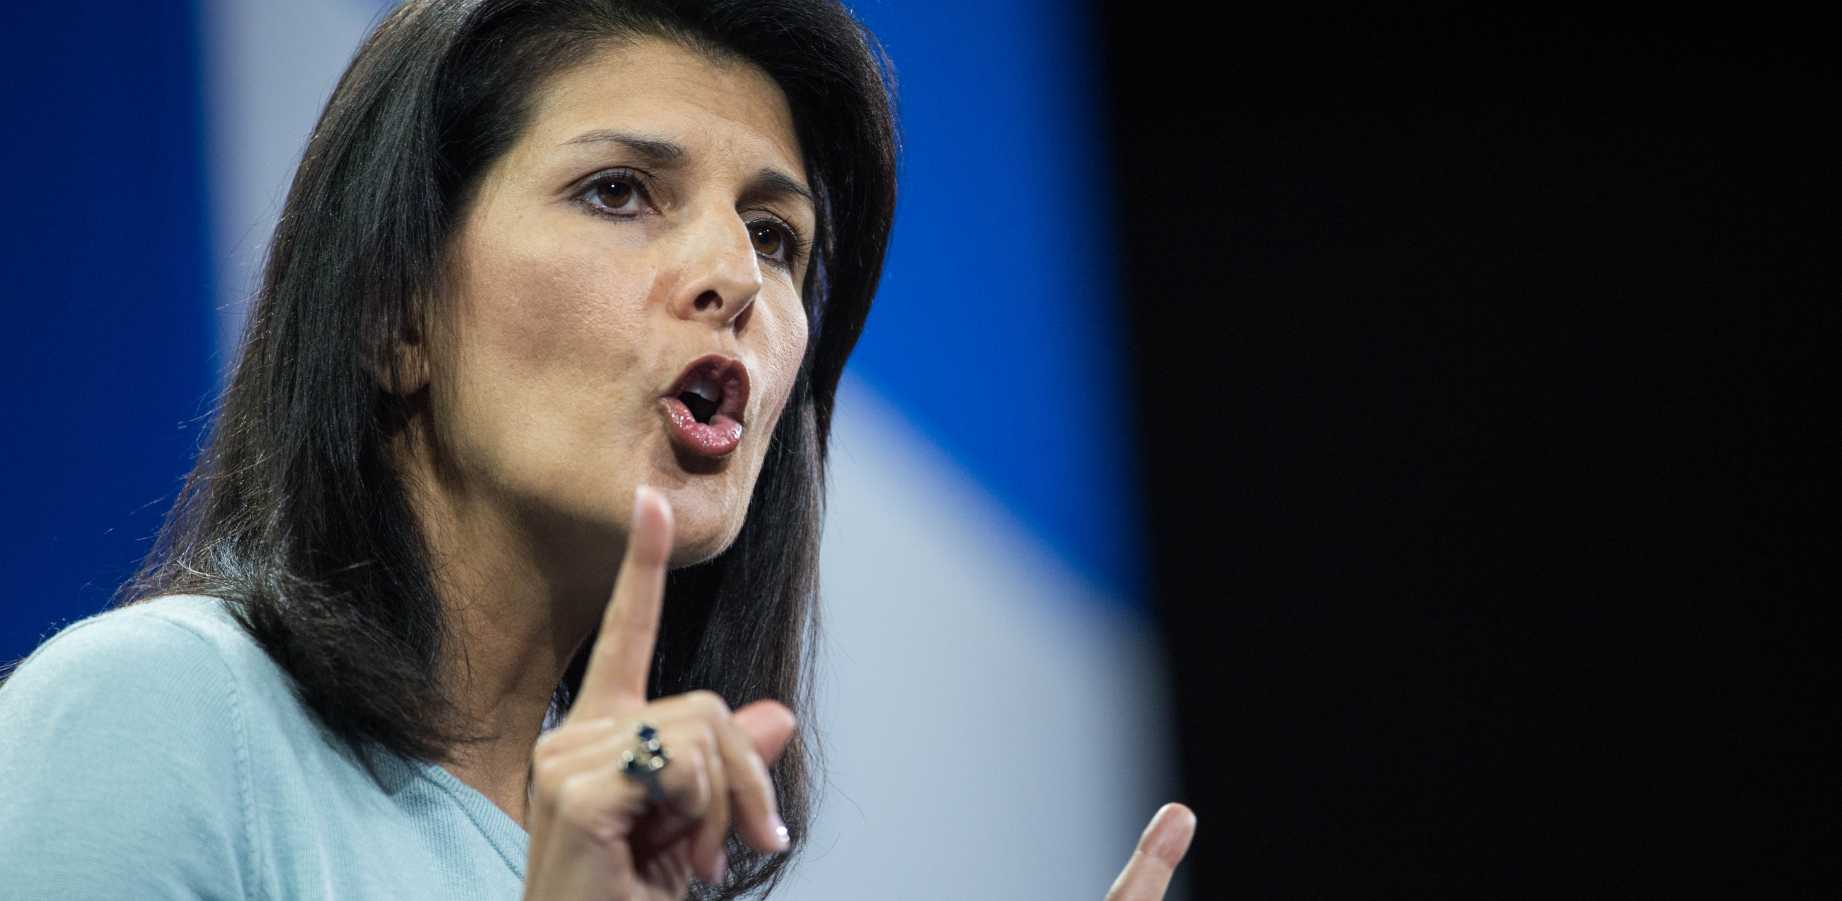 Nikki Haley Disses Trump For ‘Only’ Winning 60% Of SC “40% Is Not A Small Number”